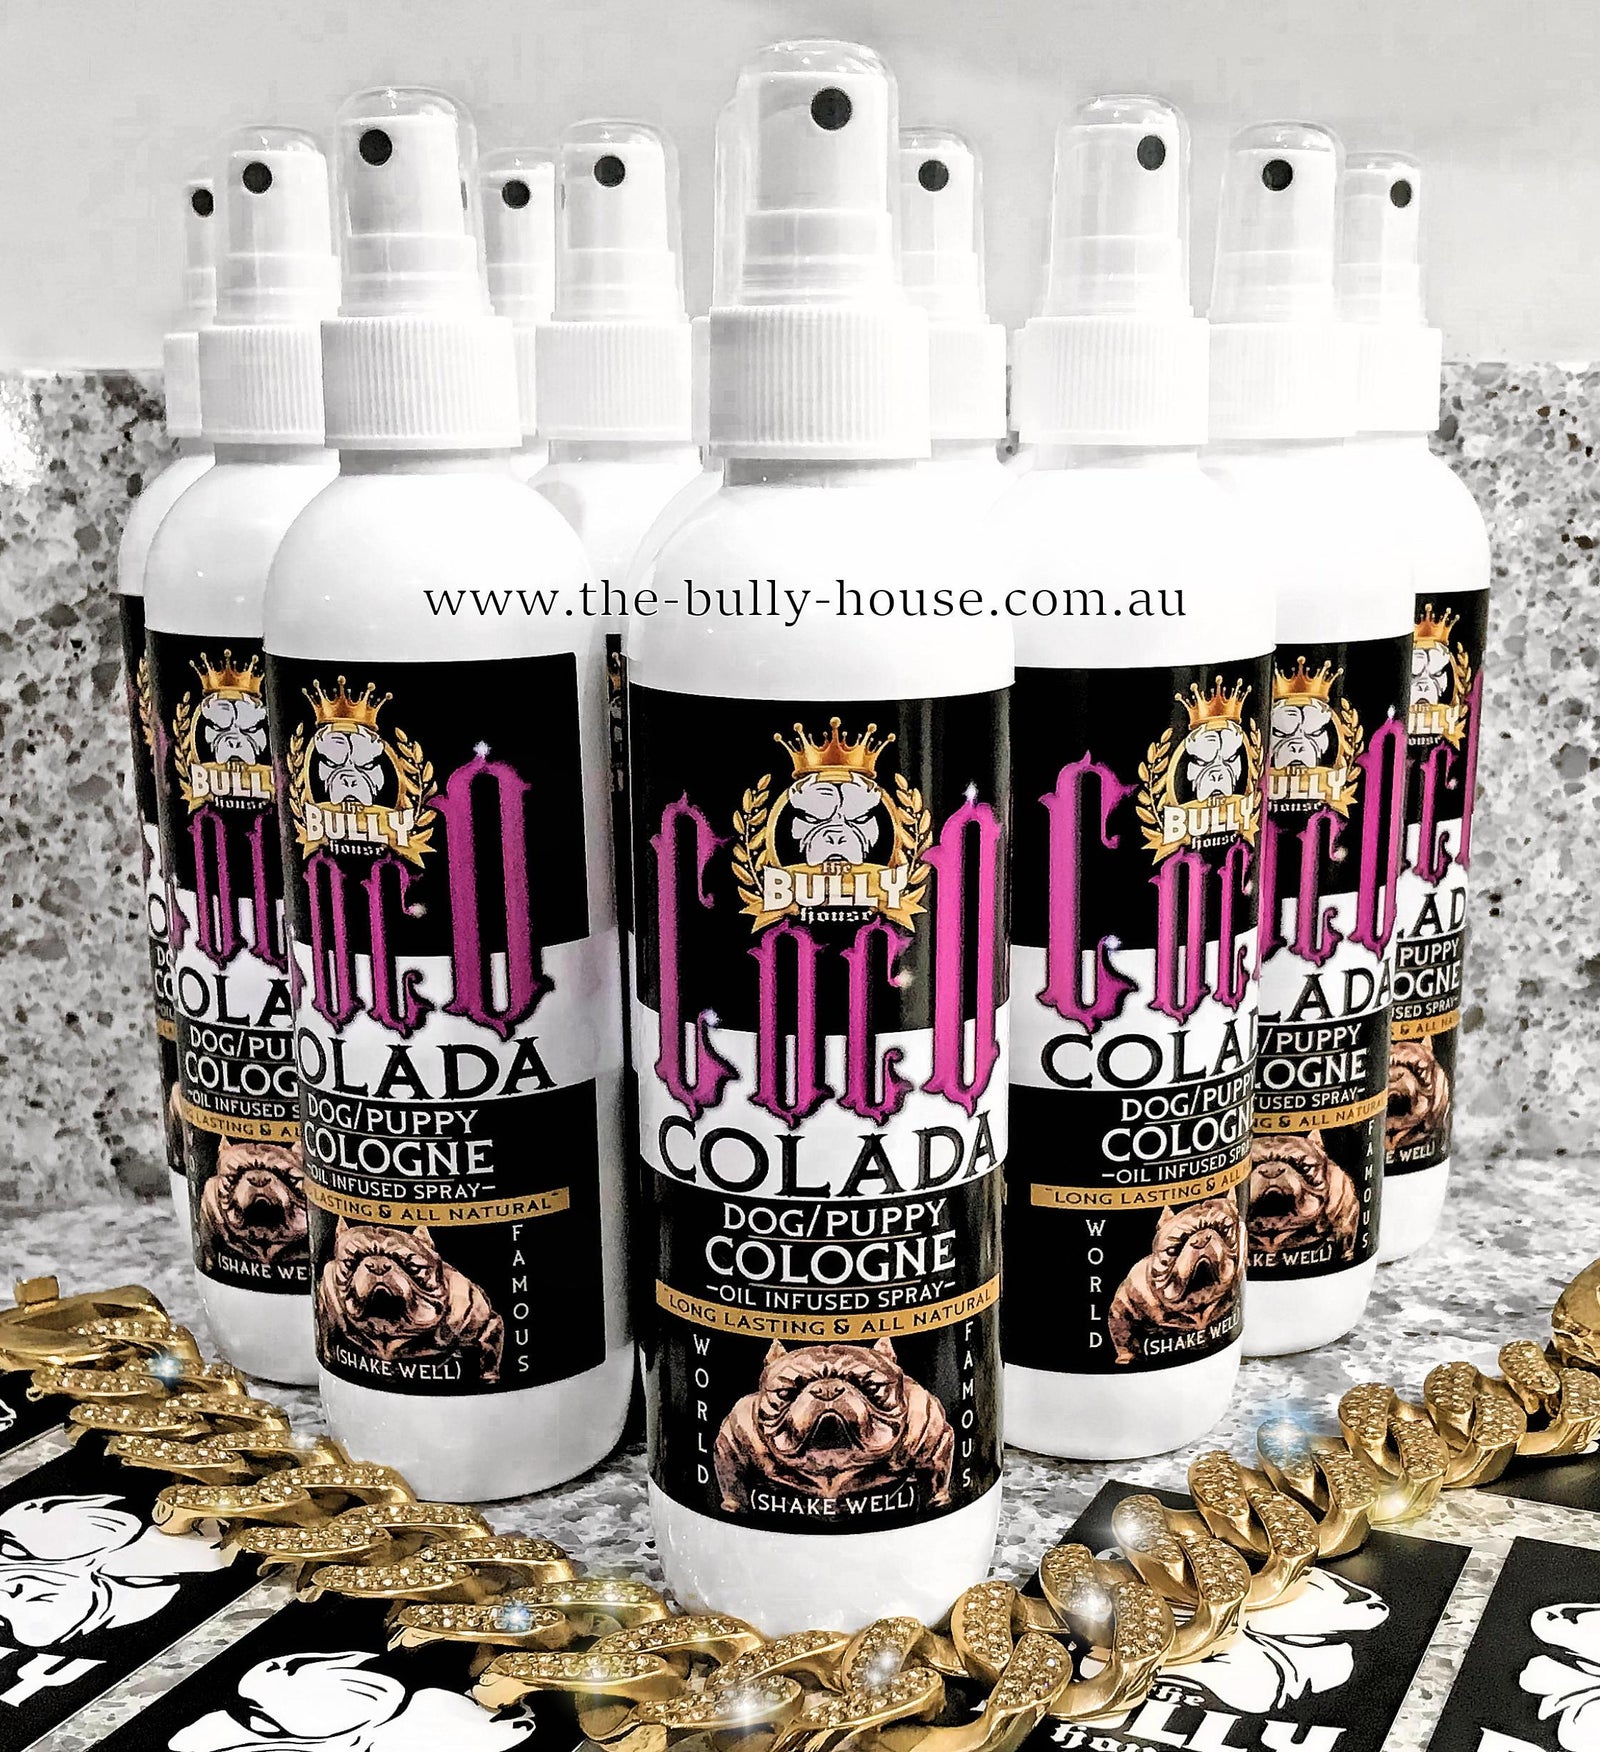 COCO COLADA  - 500ml - Dog/Puppy Cologne spray - OUR FAMOUS SIGNATURE FRAGRANCE-